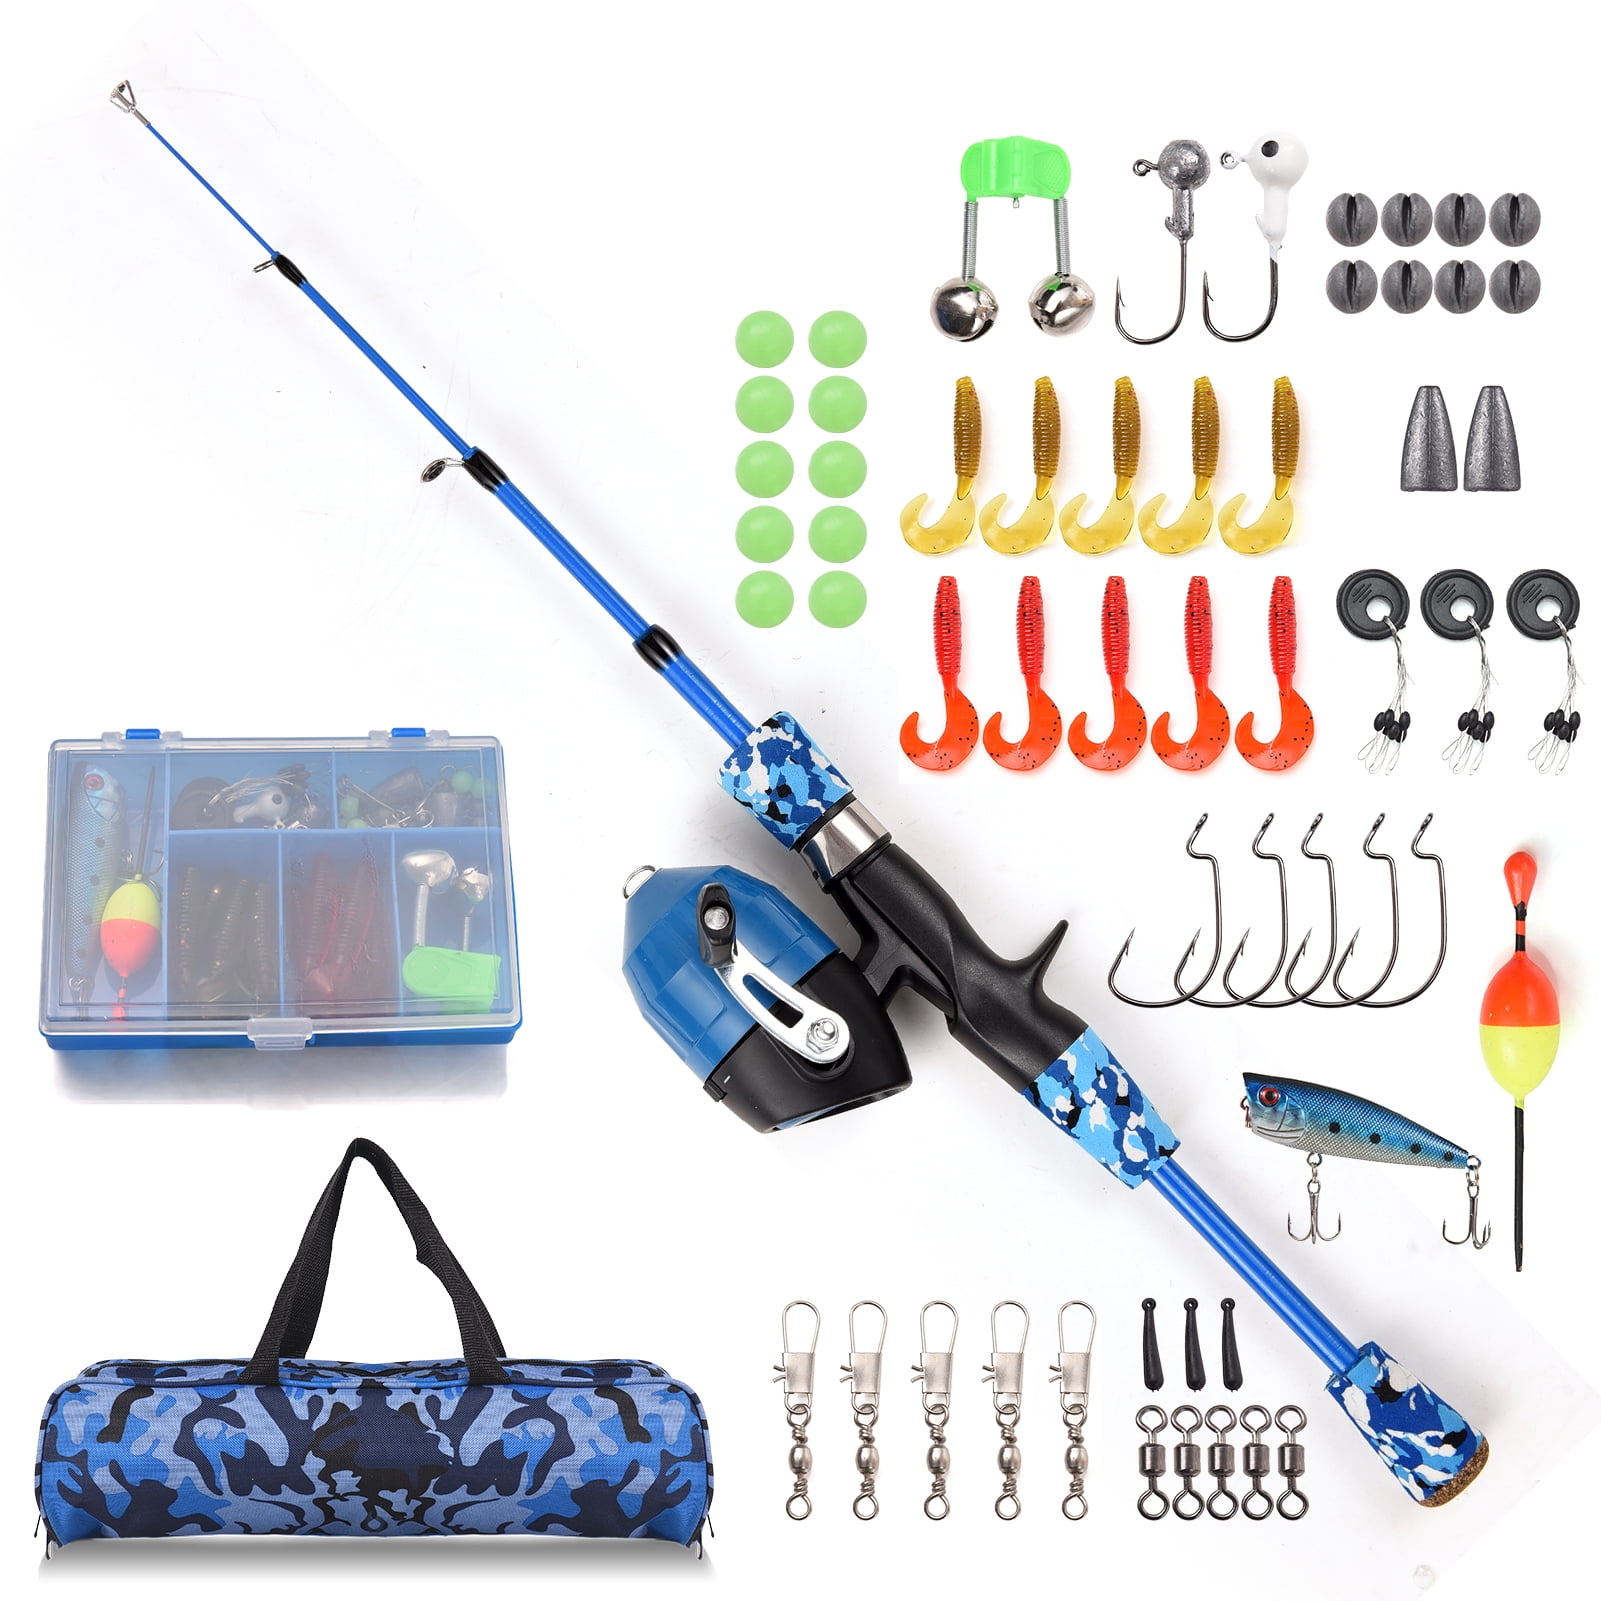 BlueFire Fishing Rod Kit, Carbon Fiber Telescopic Fishing Pole and Reel  Combo with Spinning Reel, Line, Lure, Hooks and Carrier Bag, Fishing Gear  Set for Beginner Adults Saltwater color 2.1m 